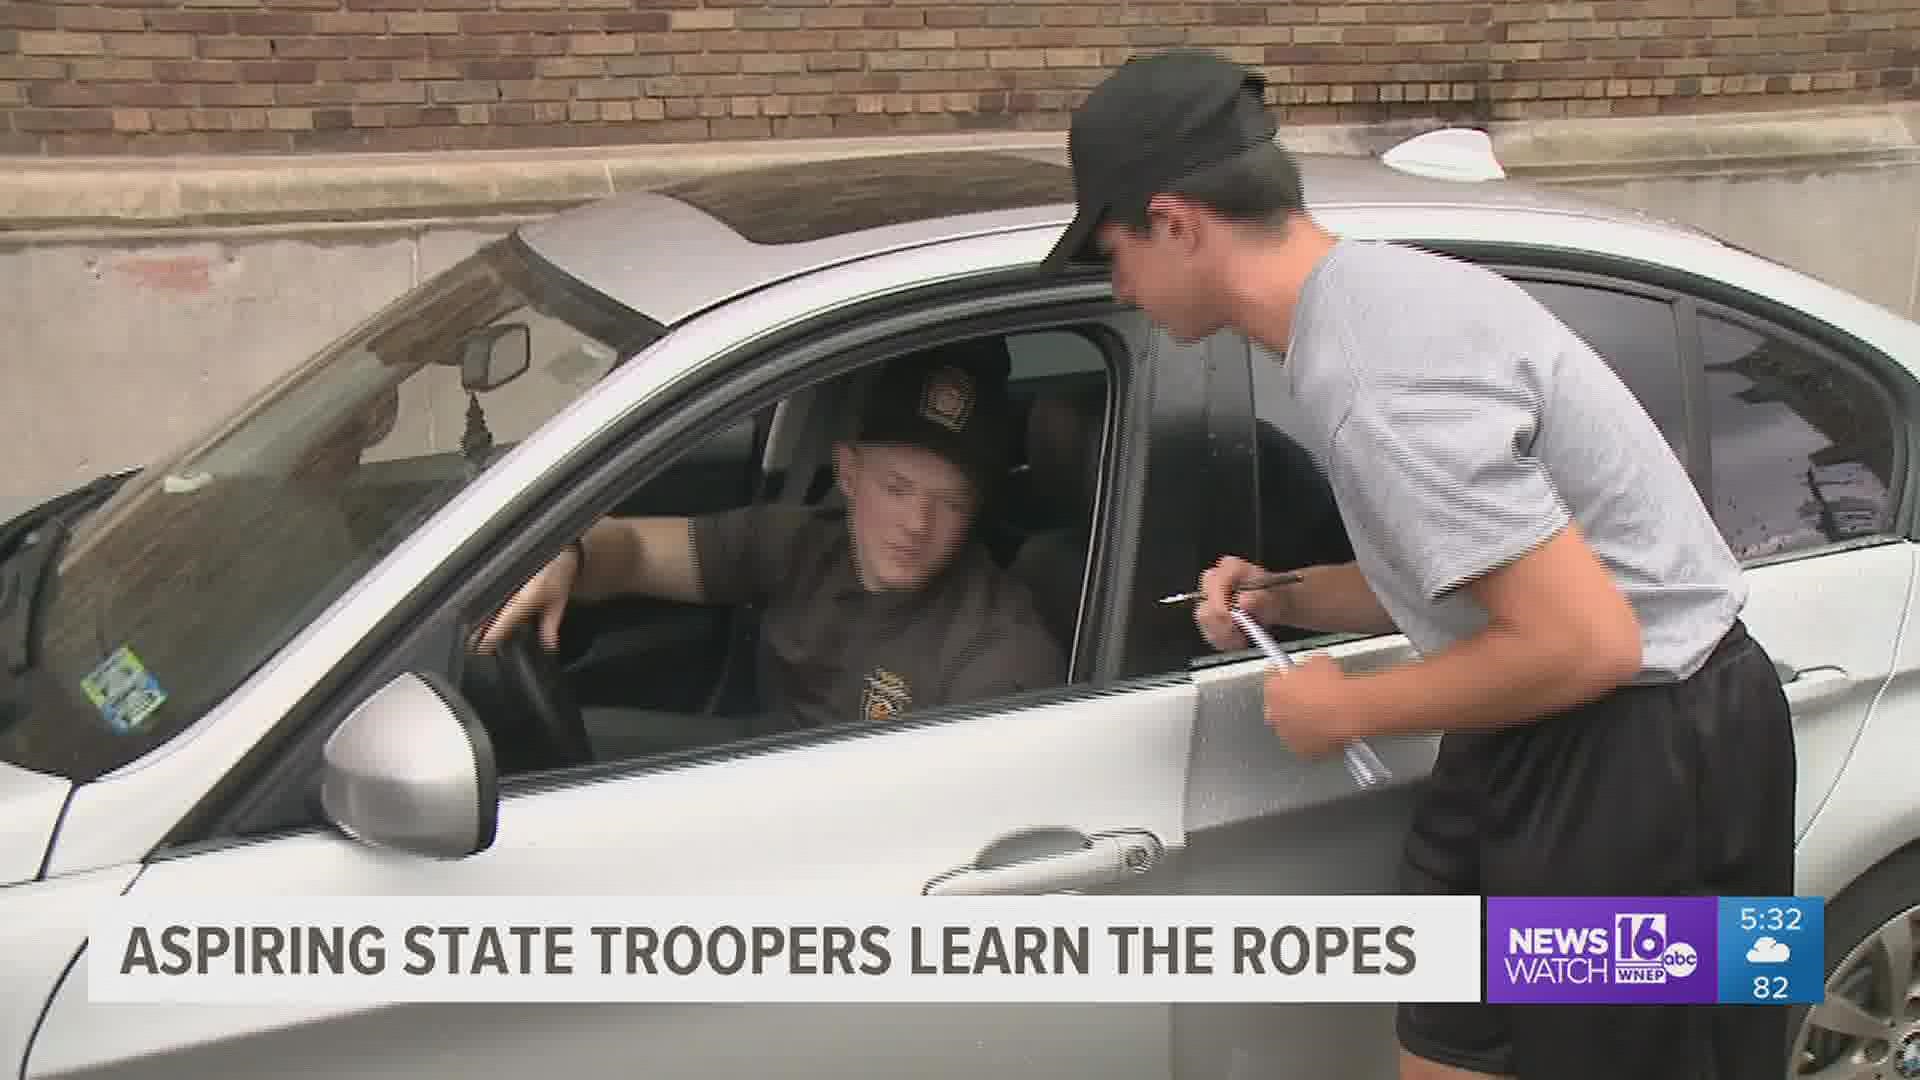 Monday, Aug. 23, was the first day for a new camp in Luzerne County, and Newswatch 16's Elizabeth Worthington stopped by to meet some potential future troopers.